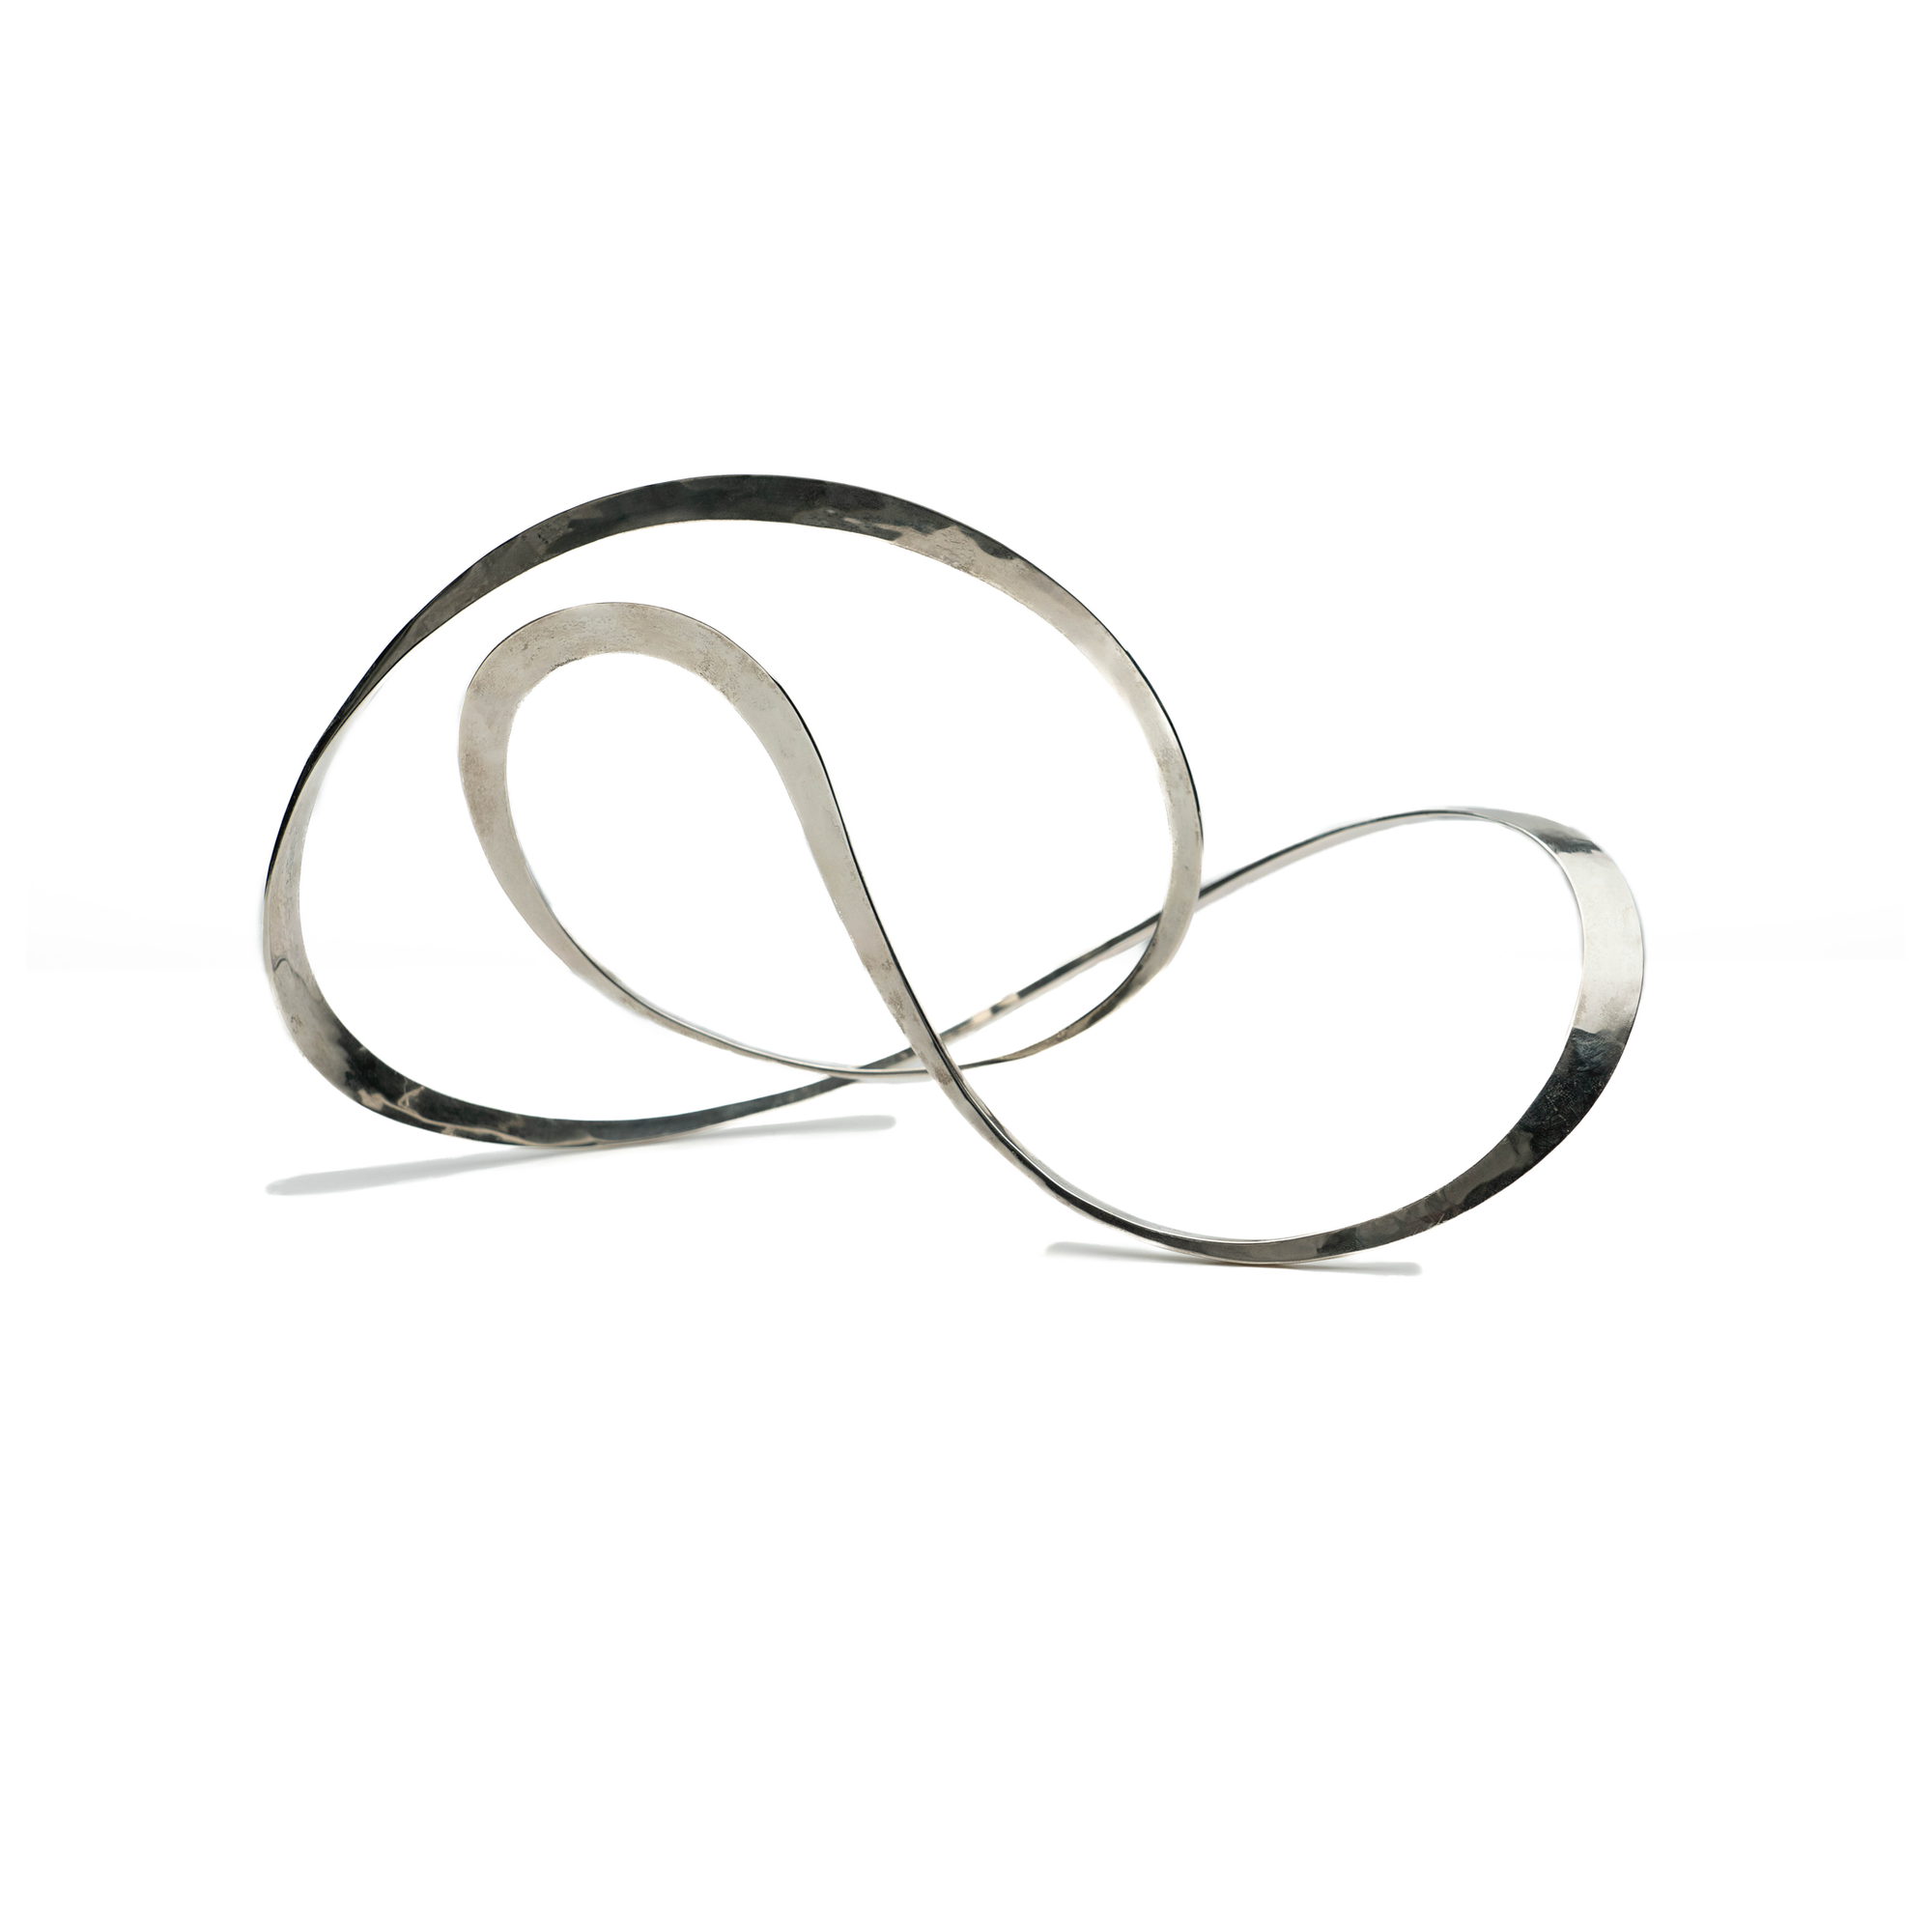 Abstract Silver Infinity Sculpture